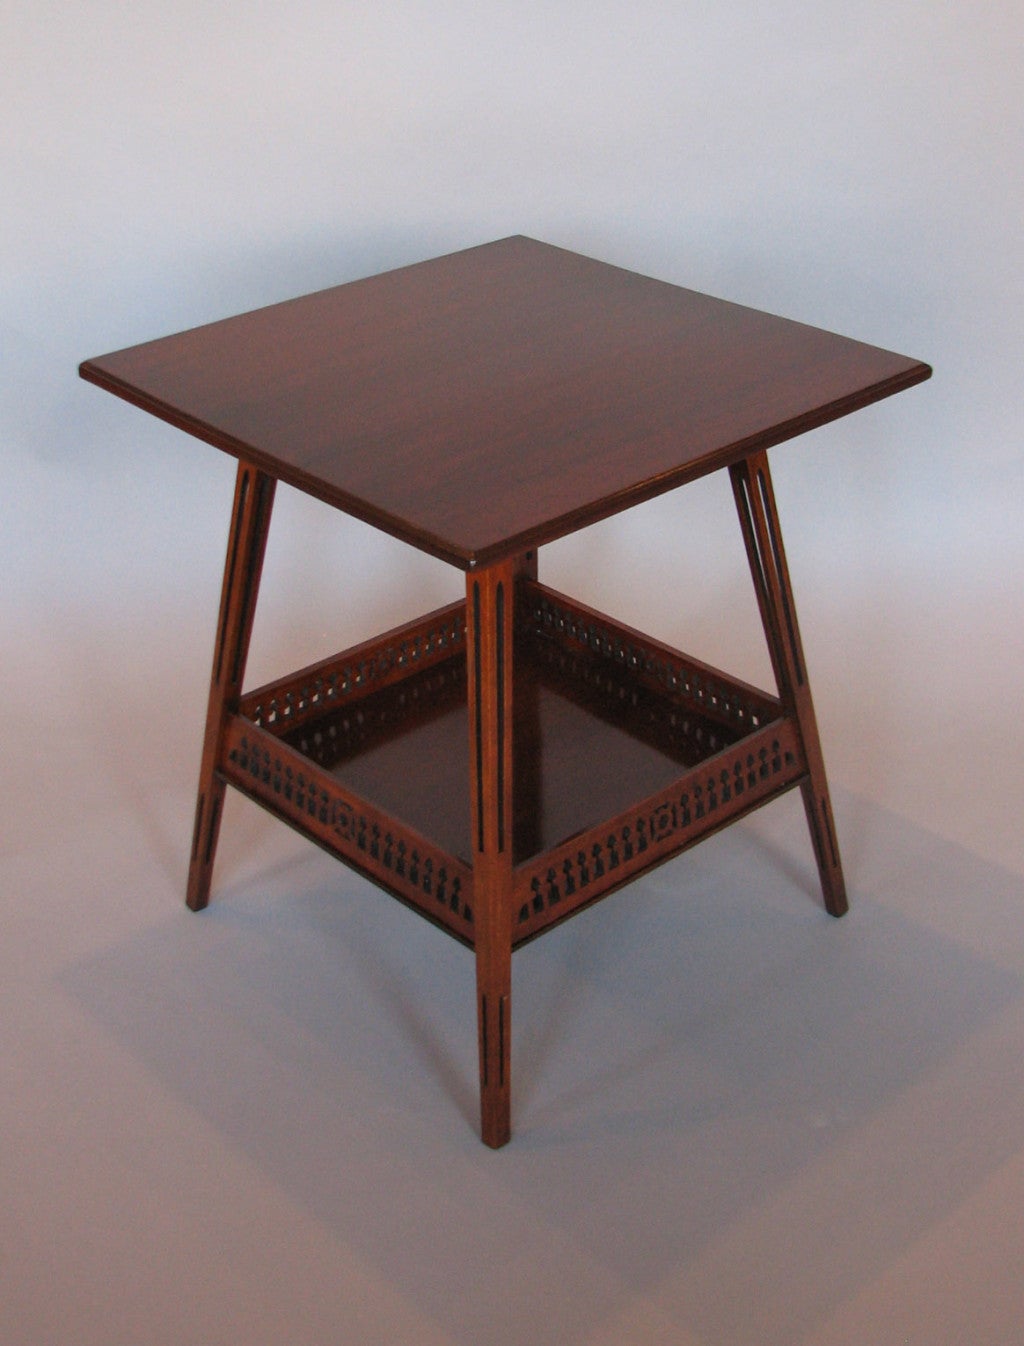 An unusual Liberty's Aesthetic period mahogany side table having one shelf enclosed by a pierced gallery, the legs having pierced cross sections. Bearing an ivorine Liberty & Co. label.